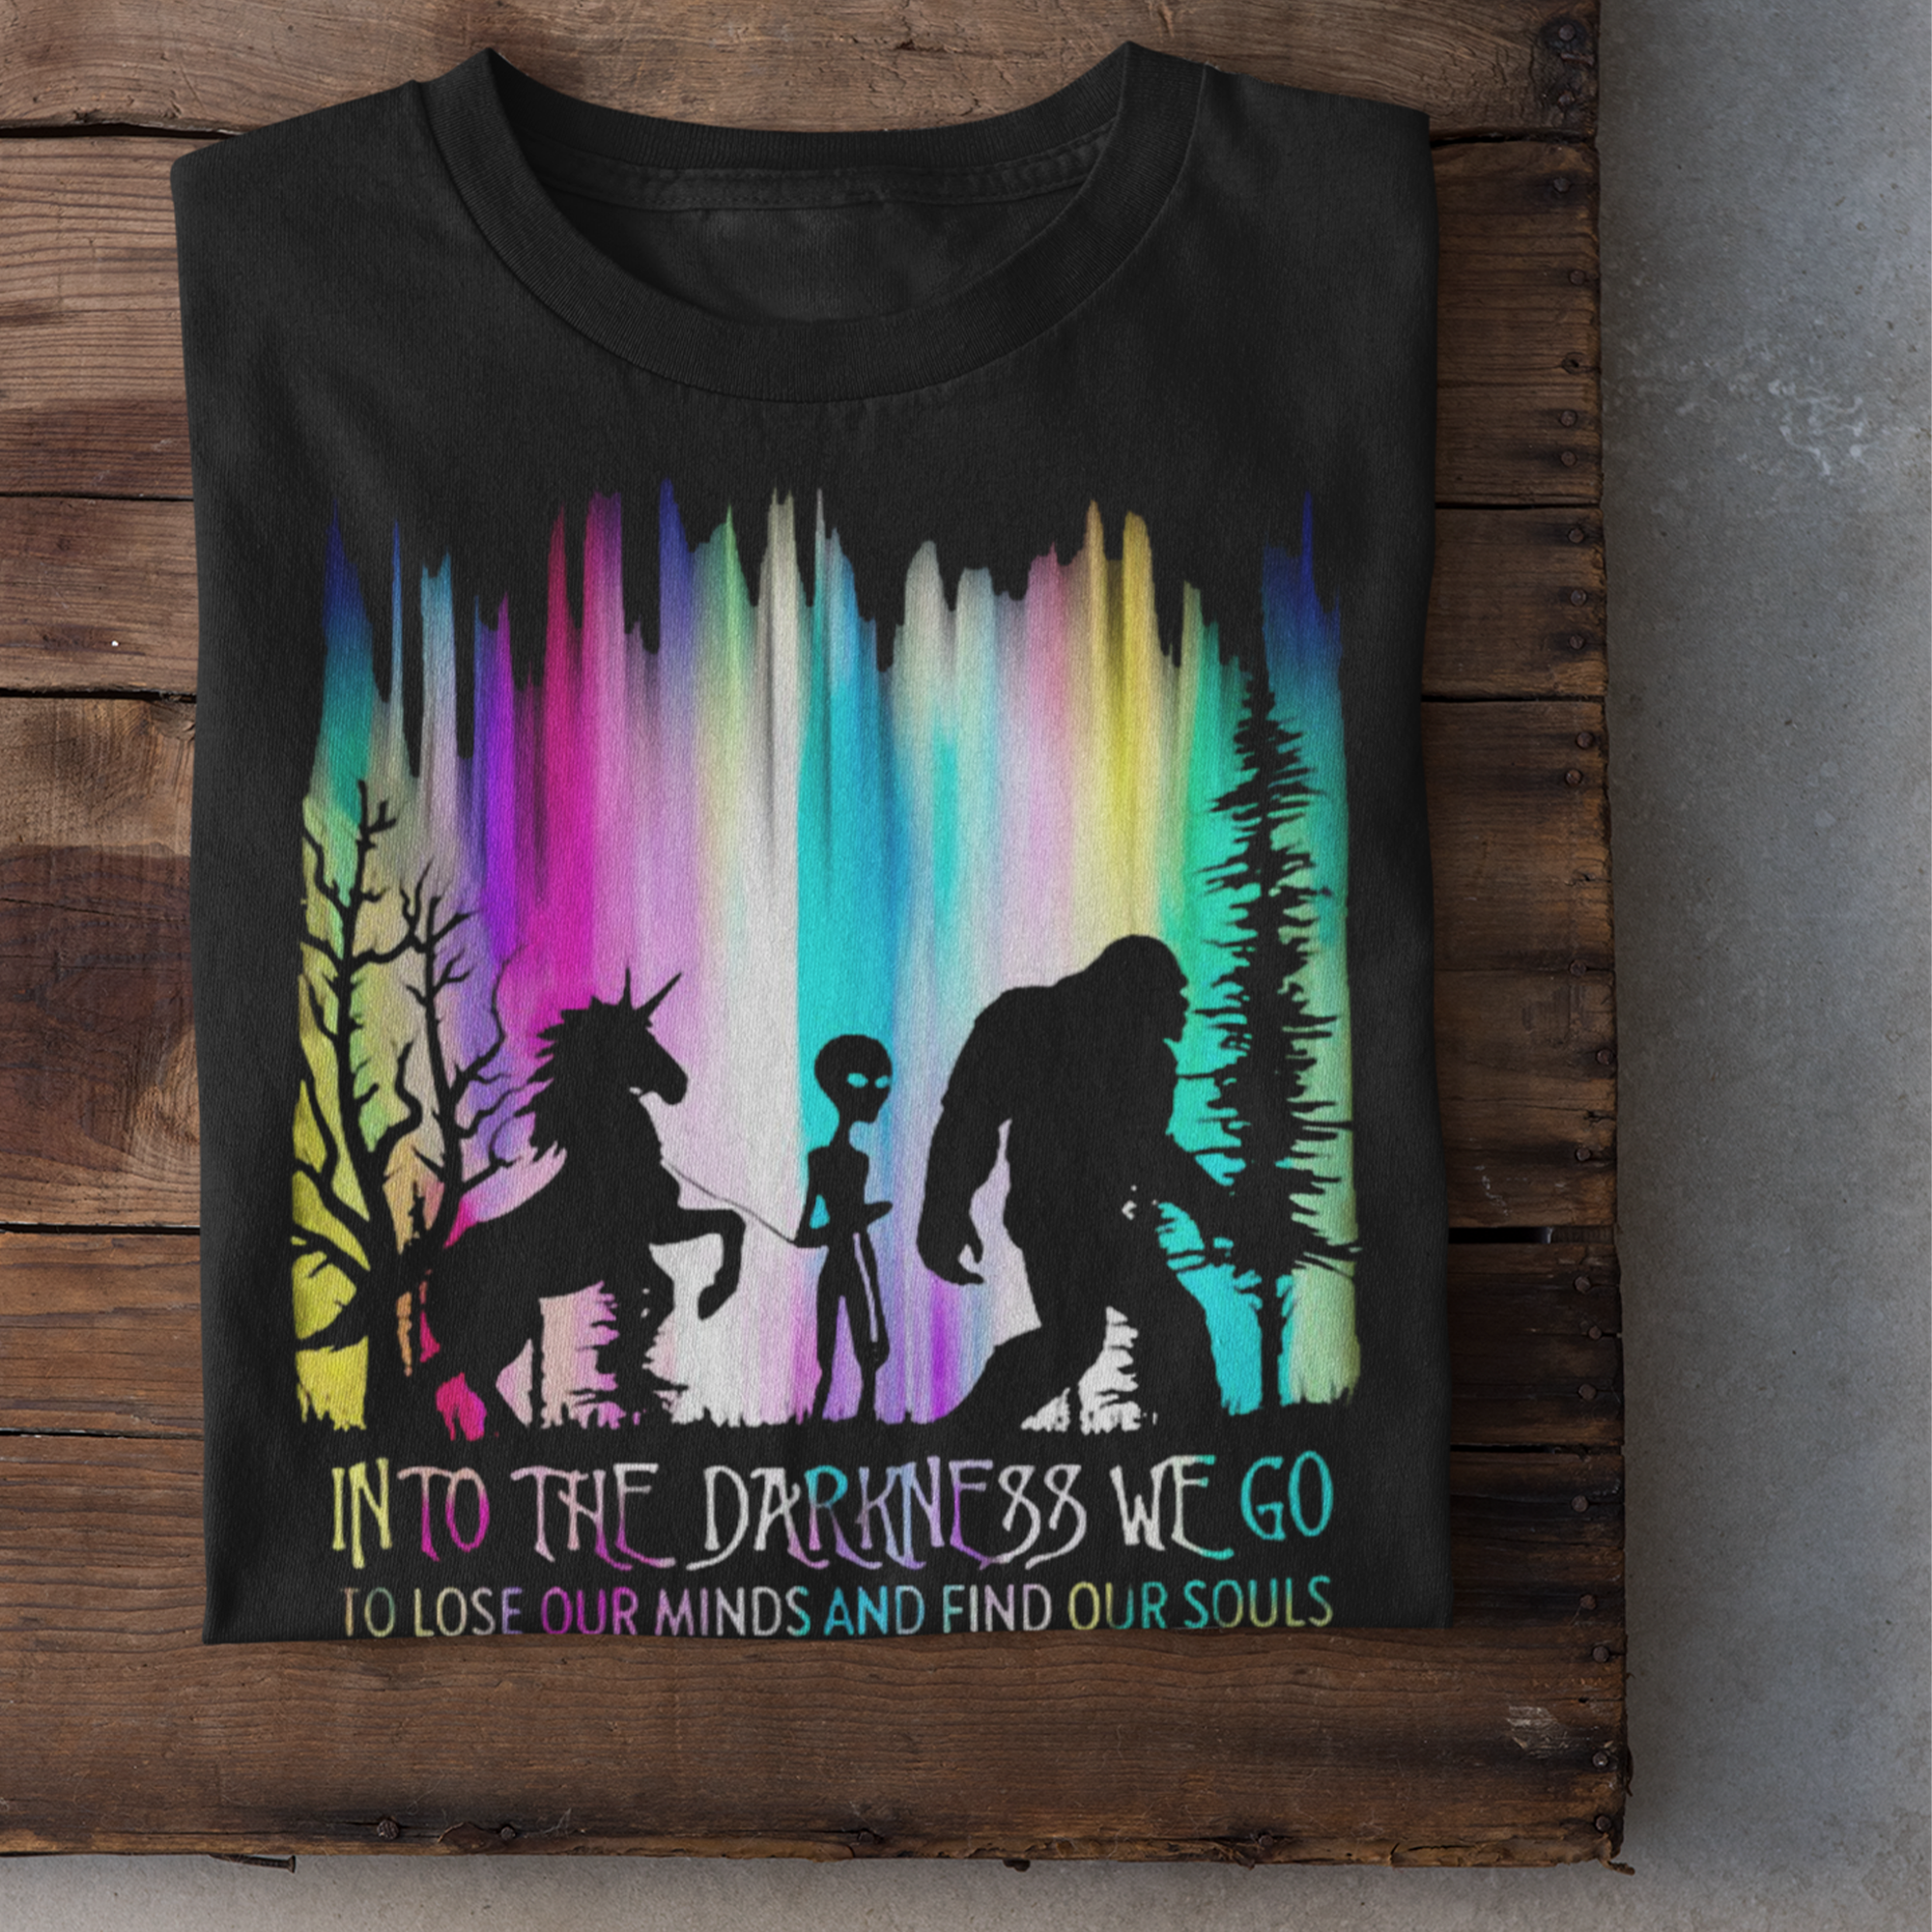 Into The Darkness We Go To Lose Our Minds Vintage T-Shirt, Bigfoot Shirt, Alien Shirt, Unicorn Shirt, Camping Shirt